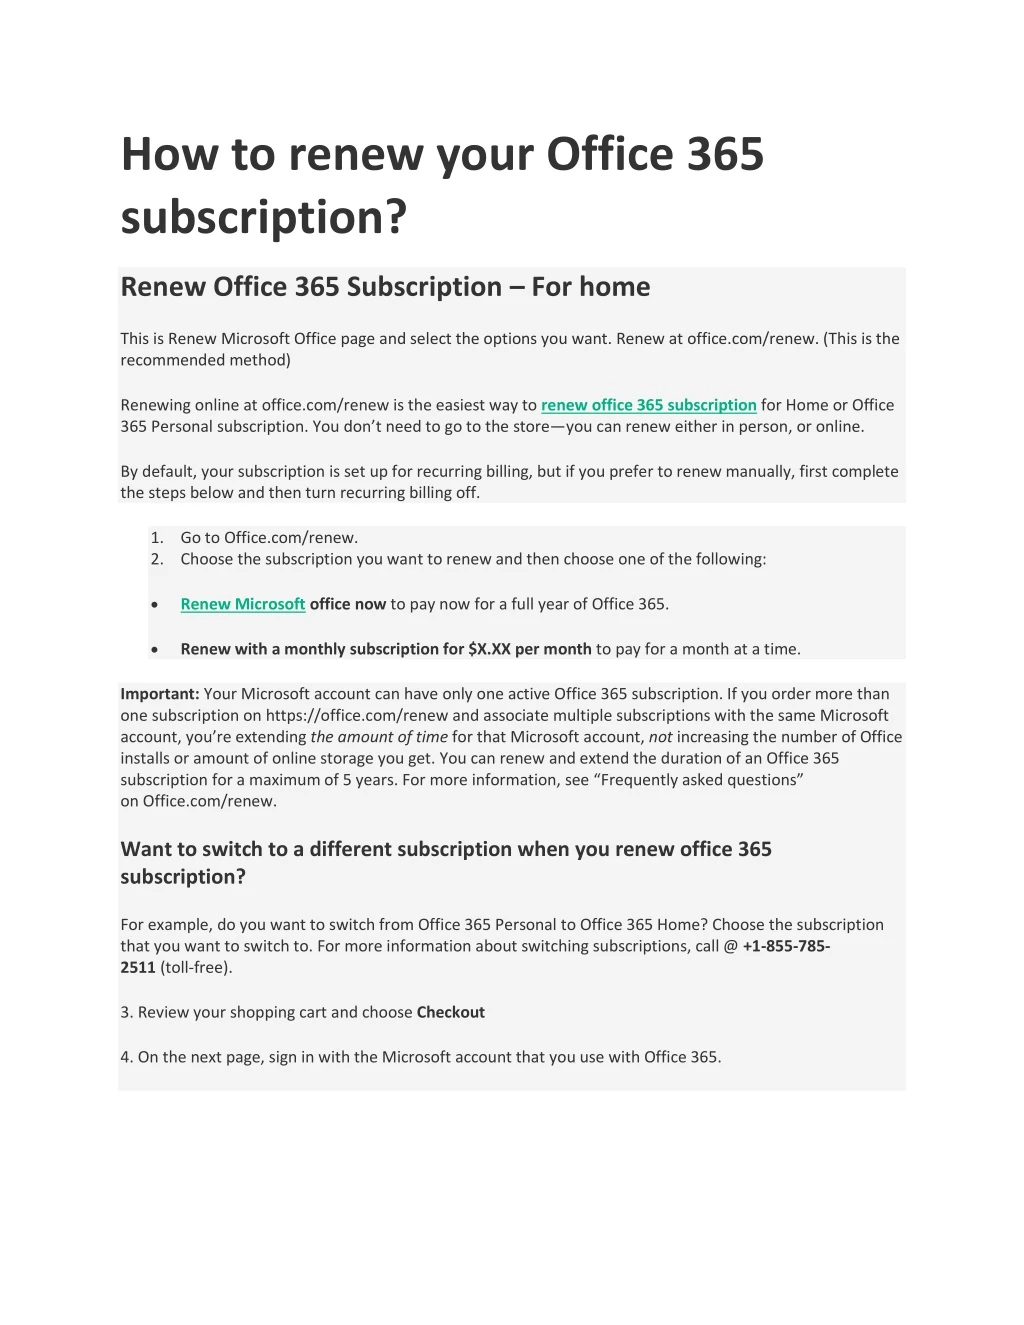 how to renew your office 365 subscription